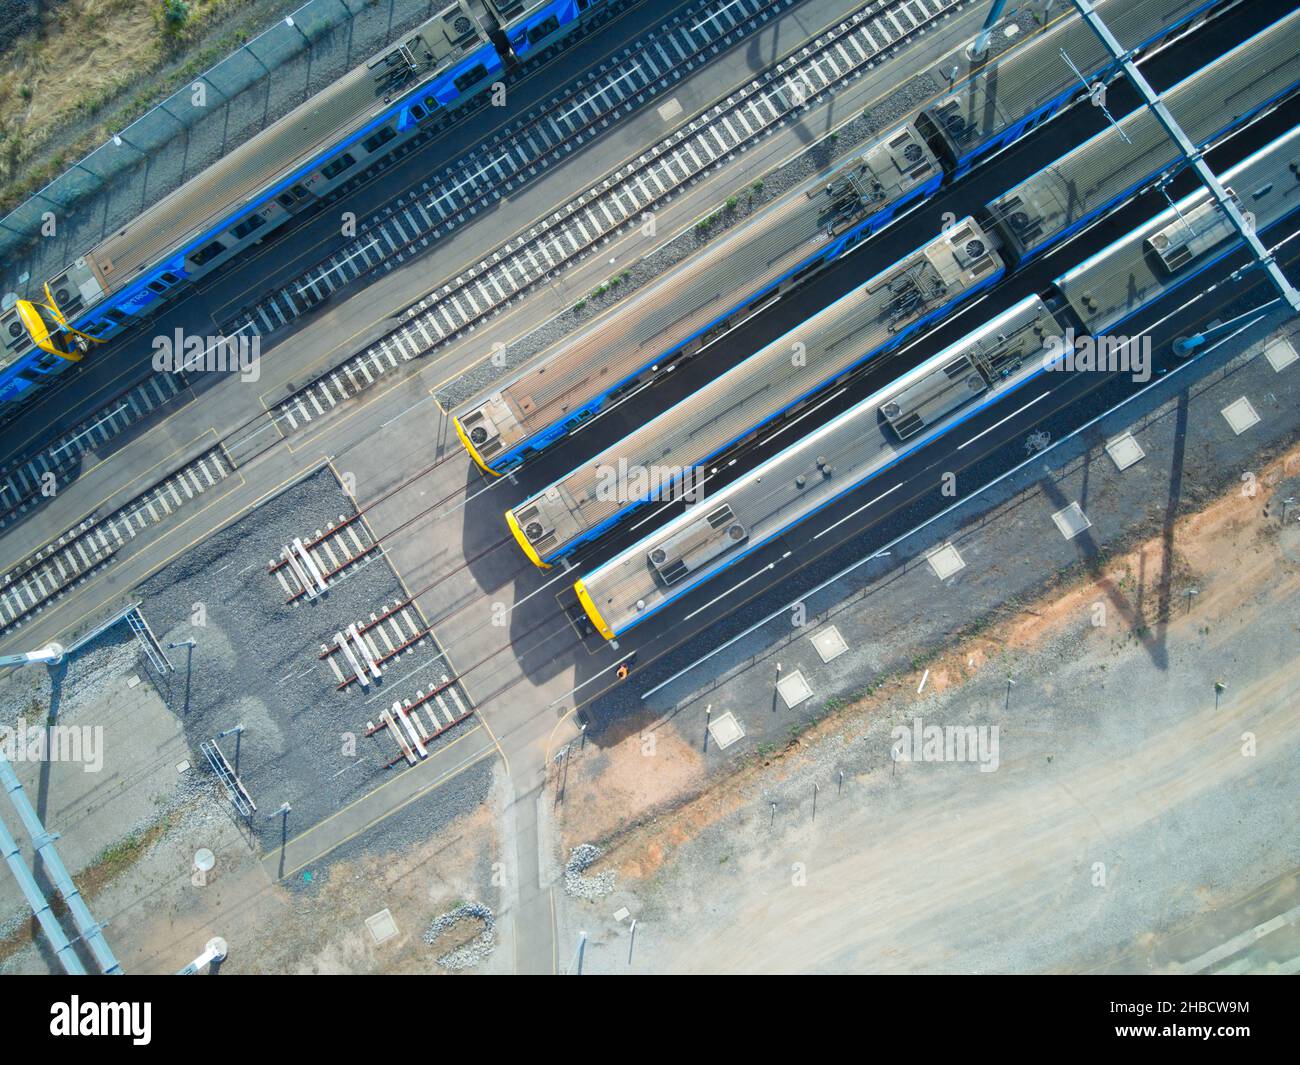 Aerial view trains in formation, Australian intercity public transport ...